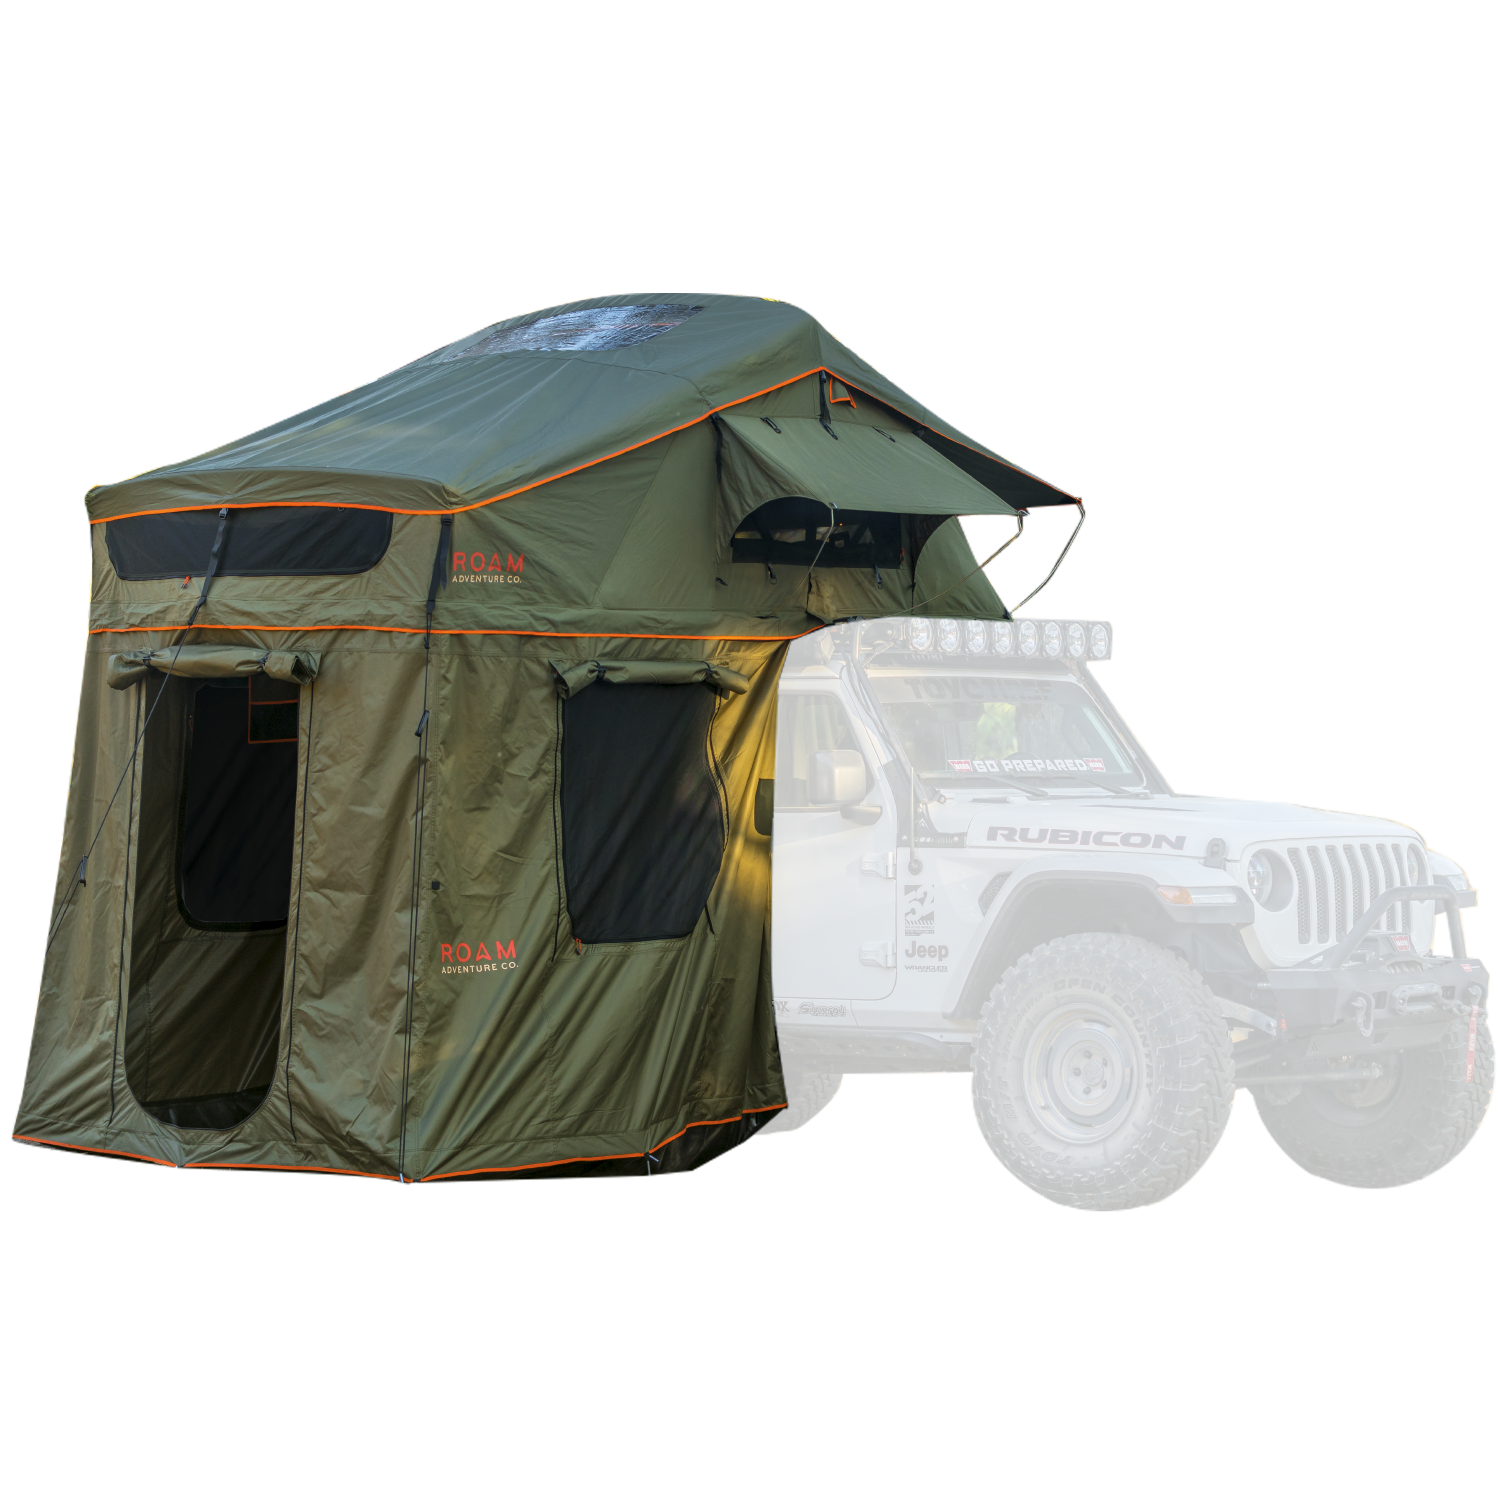 THE VAGABOND XL ROOFTOP TENT - BaseCamp Provisions